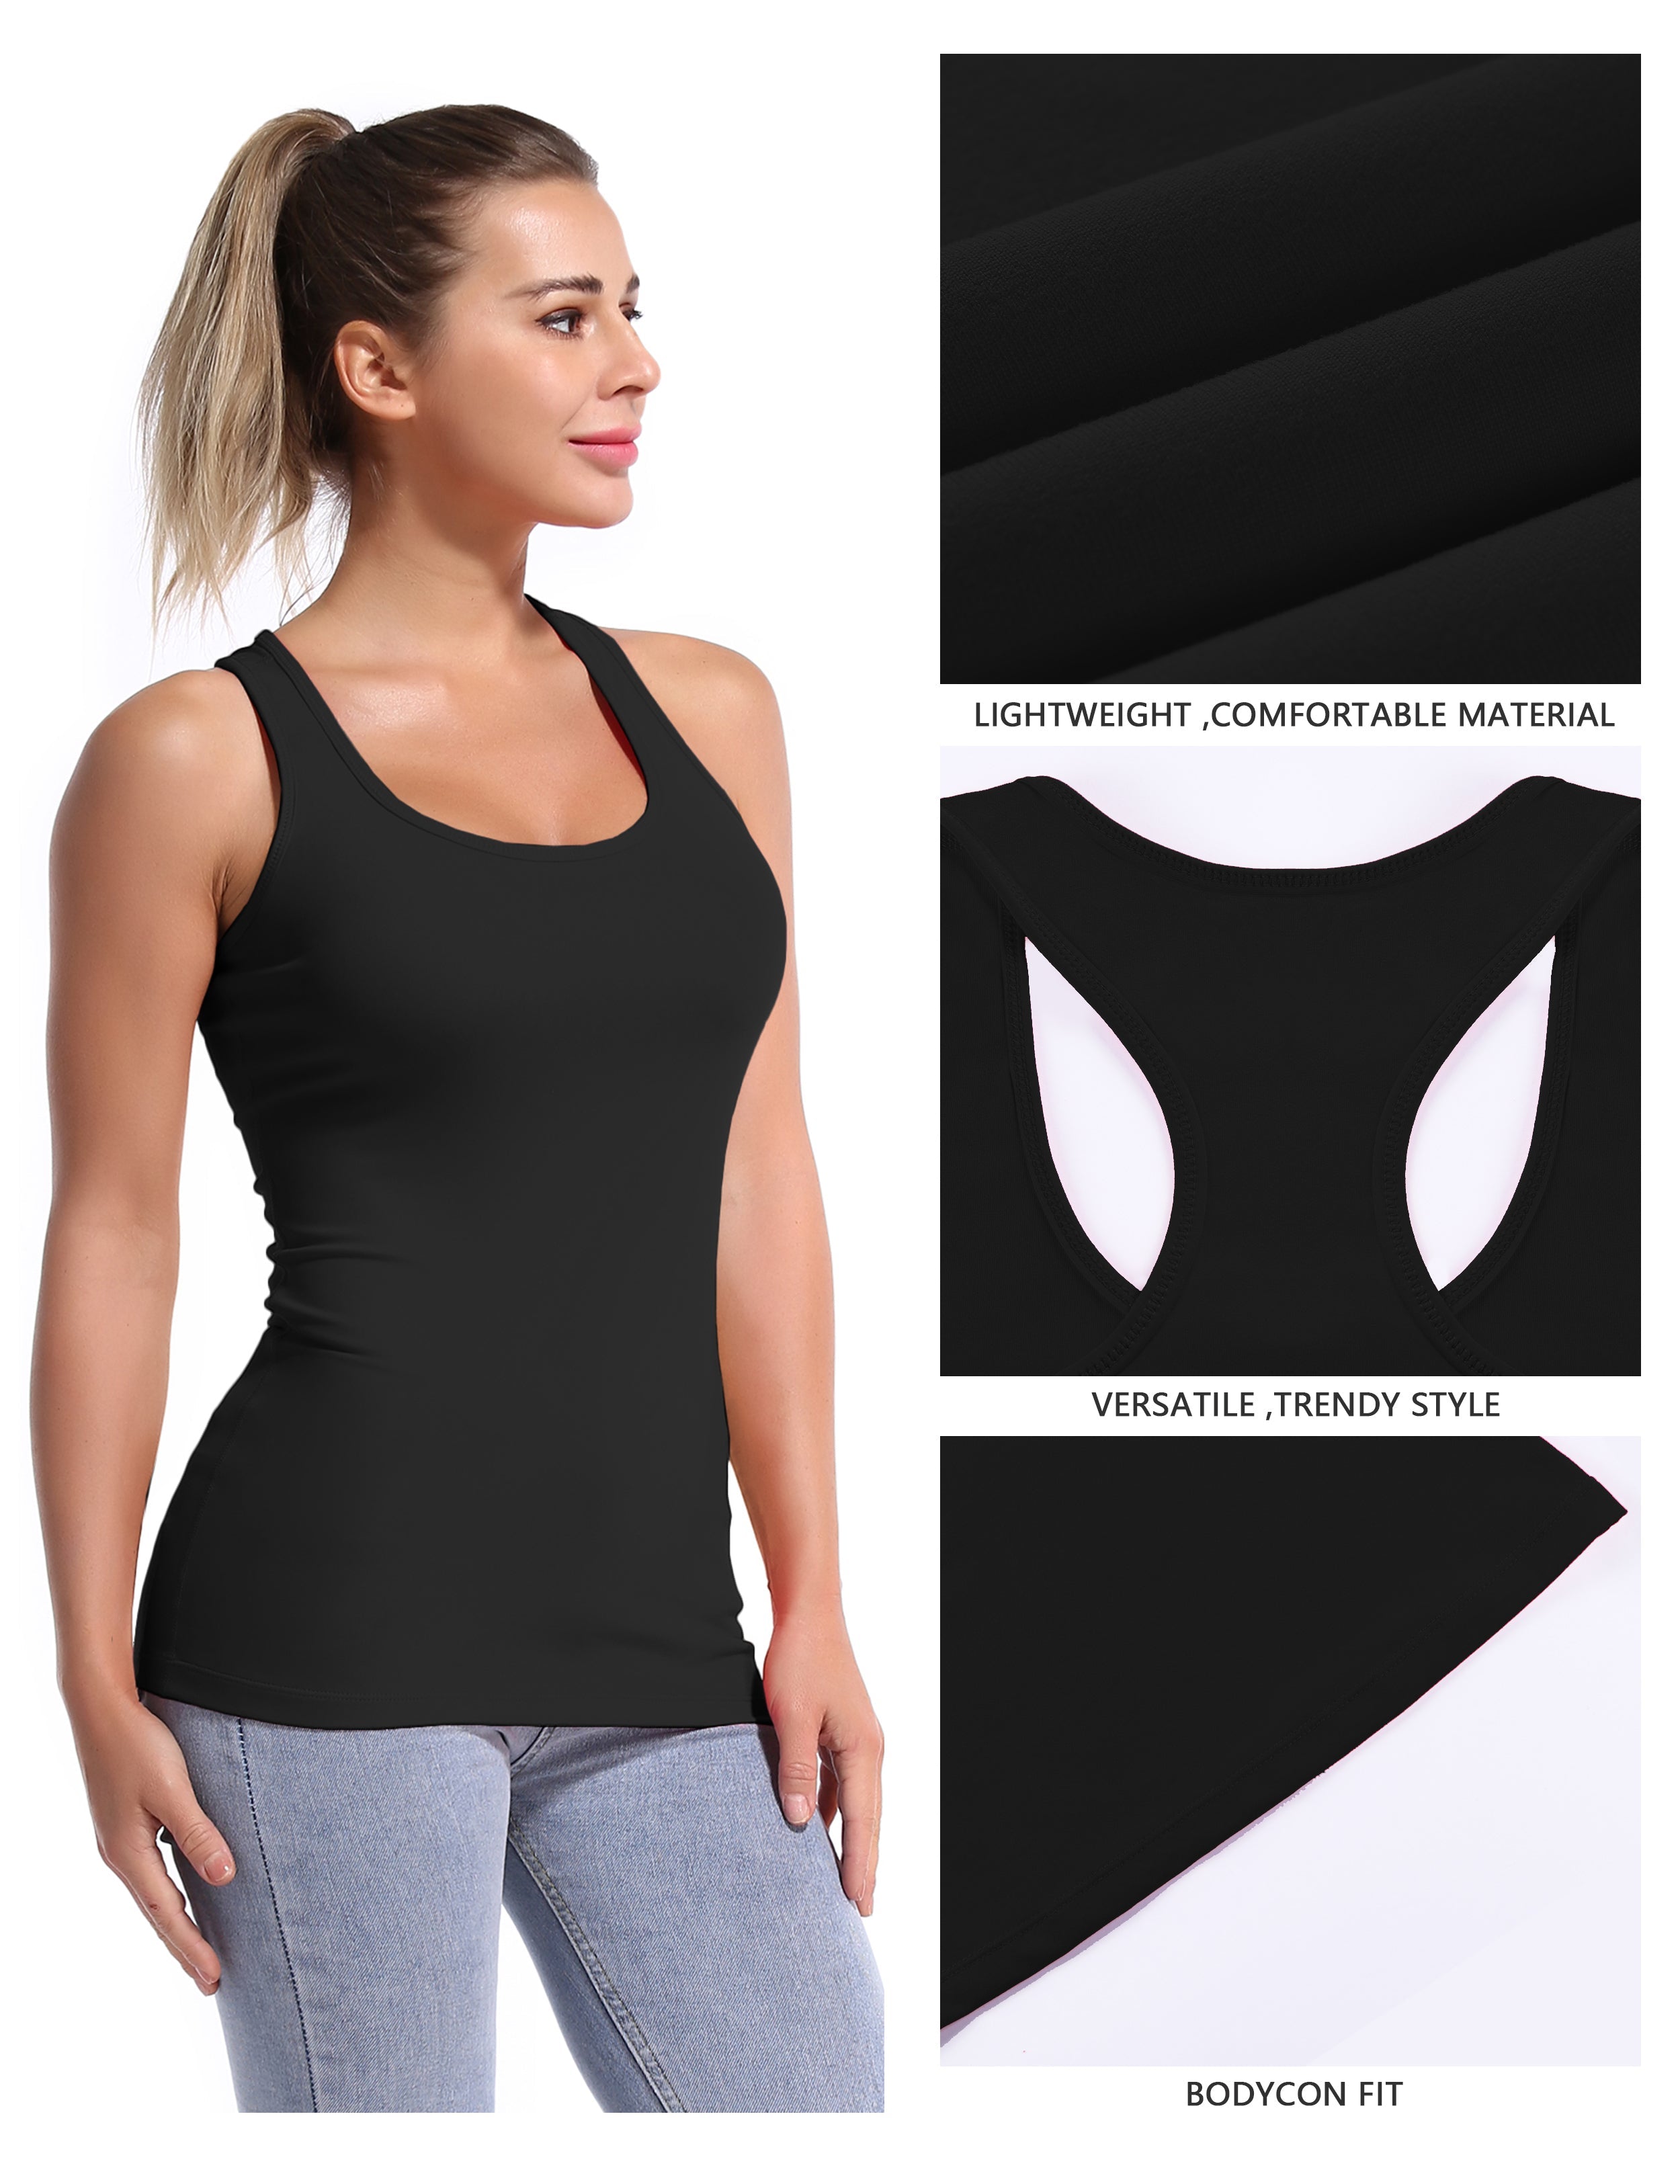 Racerback Athletic Tank Tops black 92%Nylon/8%Spandex(Cotton Soft) Designed for Yoga Tight Fit So buttery soft, it feels weightless Sweat-wicking Four-way stretch Breathable Contours your body Sits below the waistband for moderate, everyday coverage